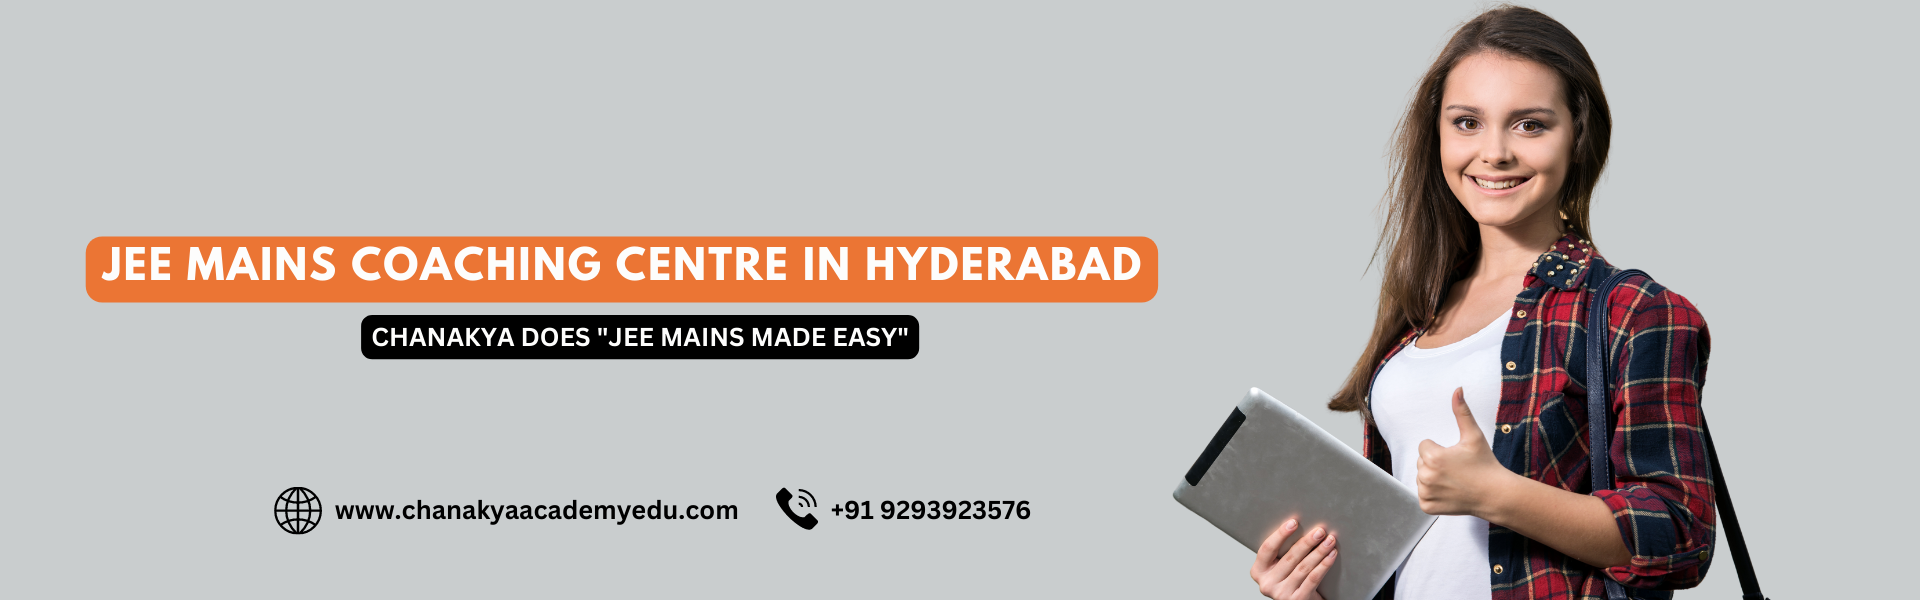 Chanakya JEE Mains Coaching Centre in Hyderabad